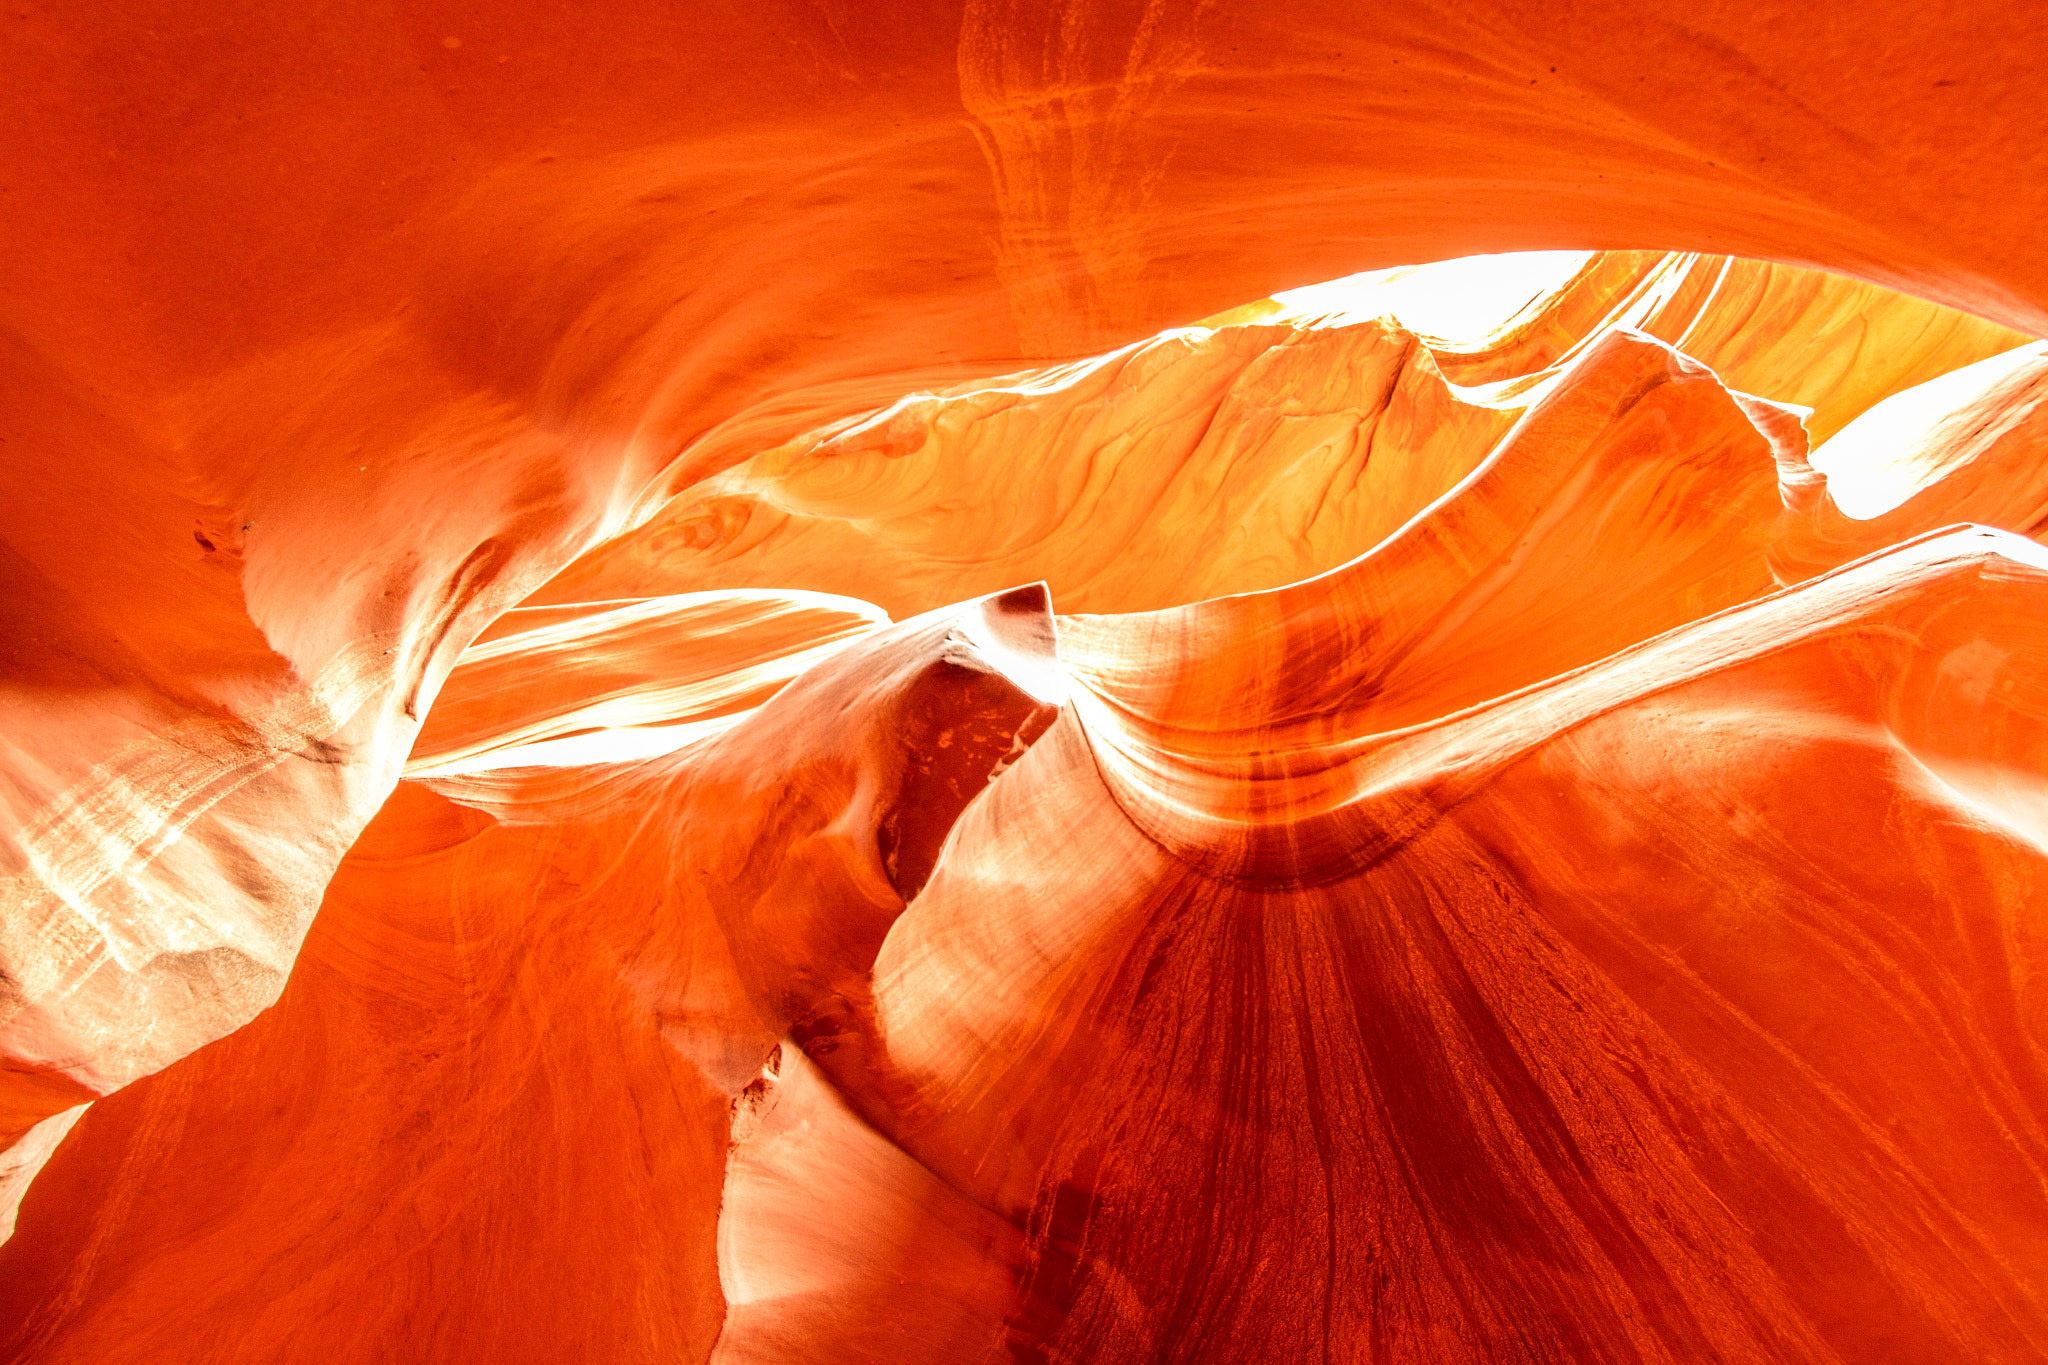 The Fiery Belly of Antelope Canyon